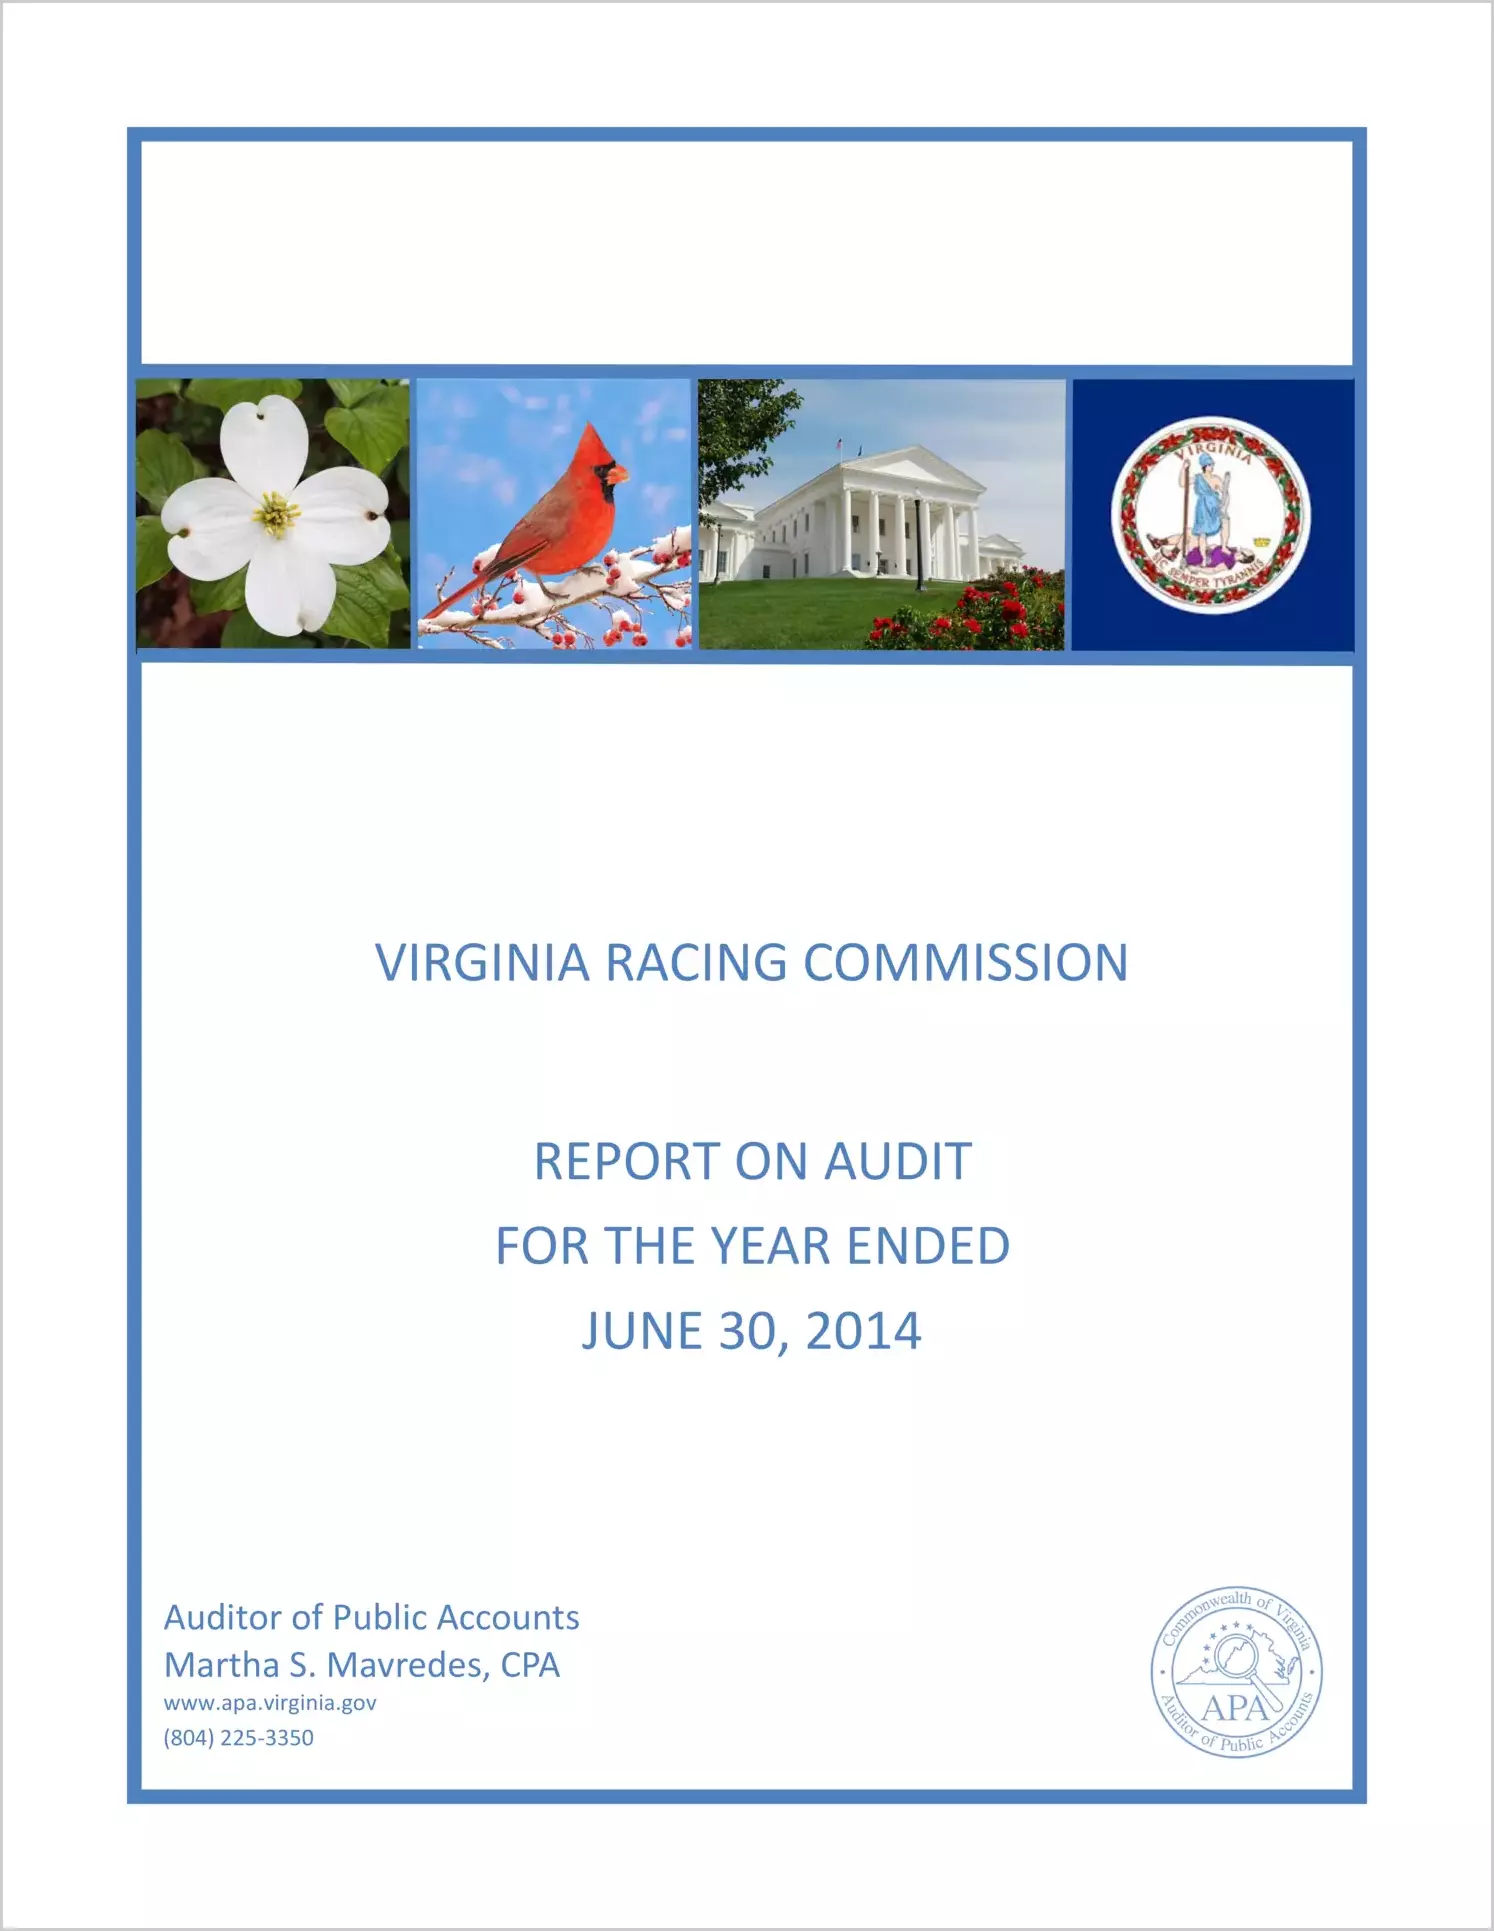 Virginia Racing Commission for the year ended June 30, 2014